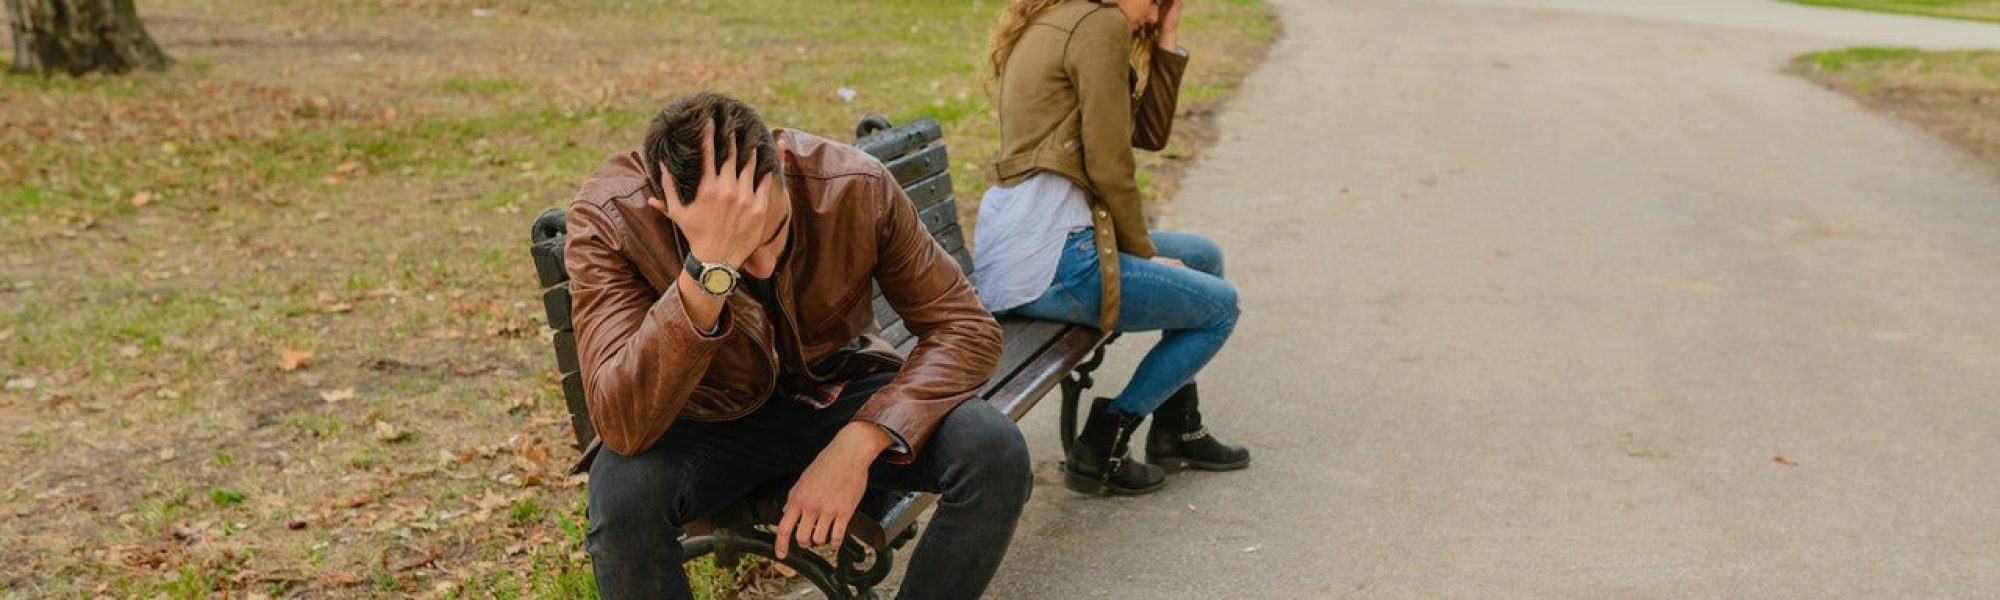 couple on park bench breaking up